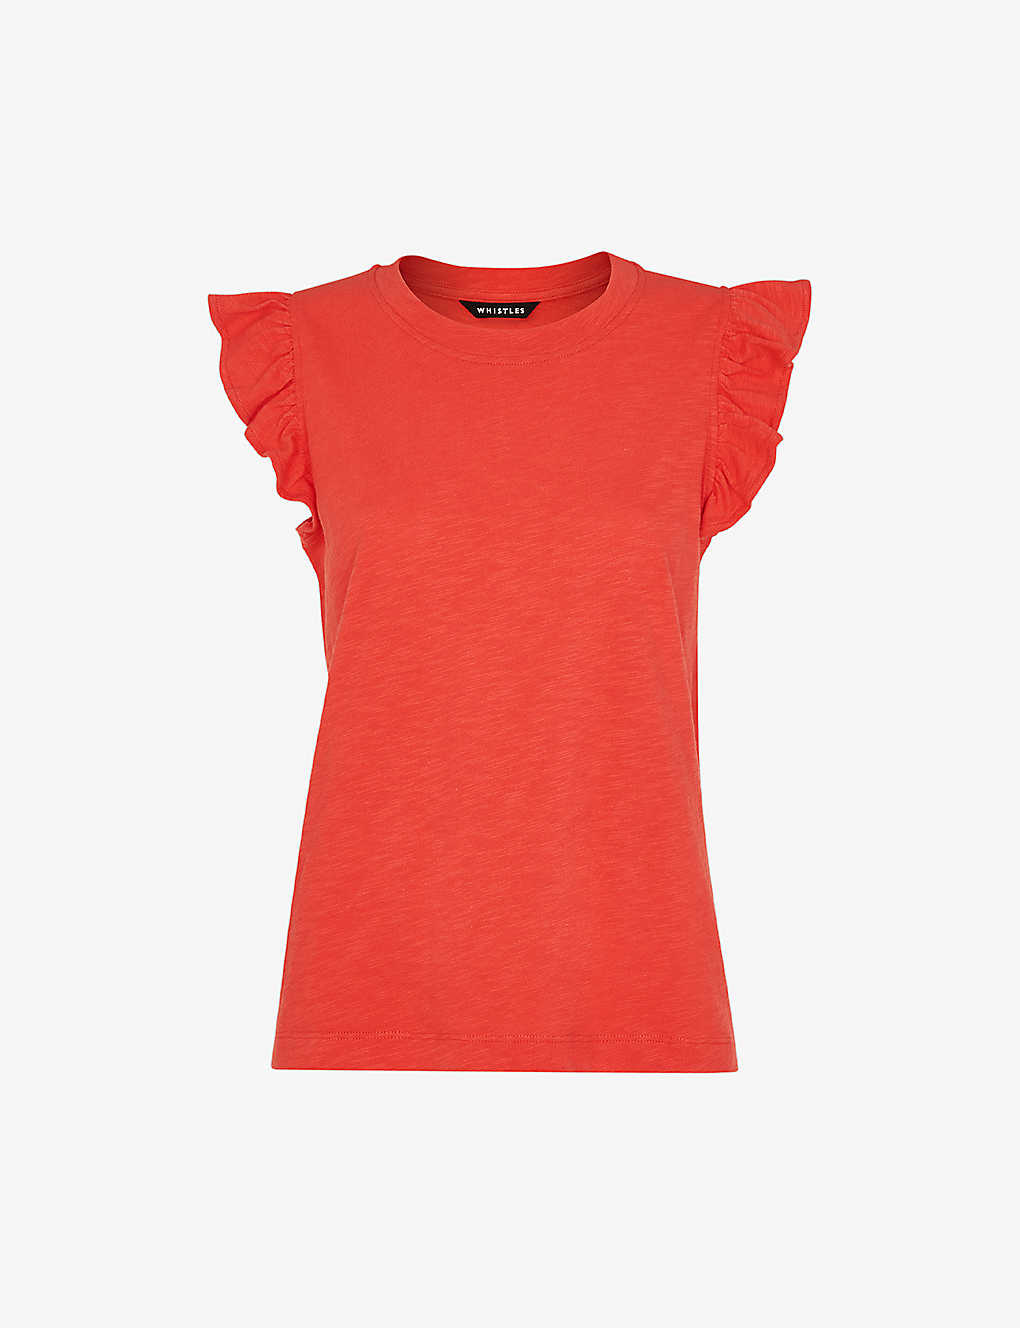 Whistles Womens Red Frilled Cap-sleeved Cotton T-shirt